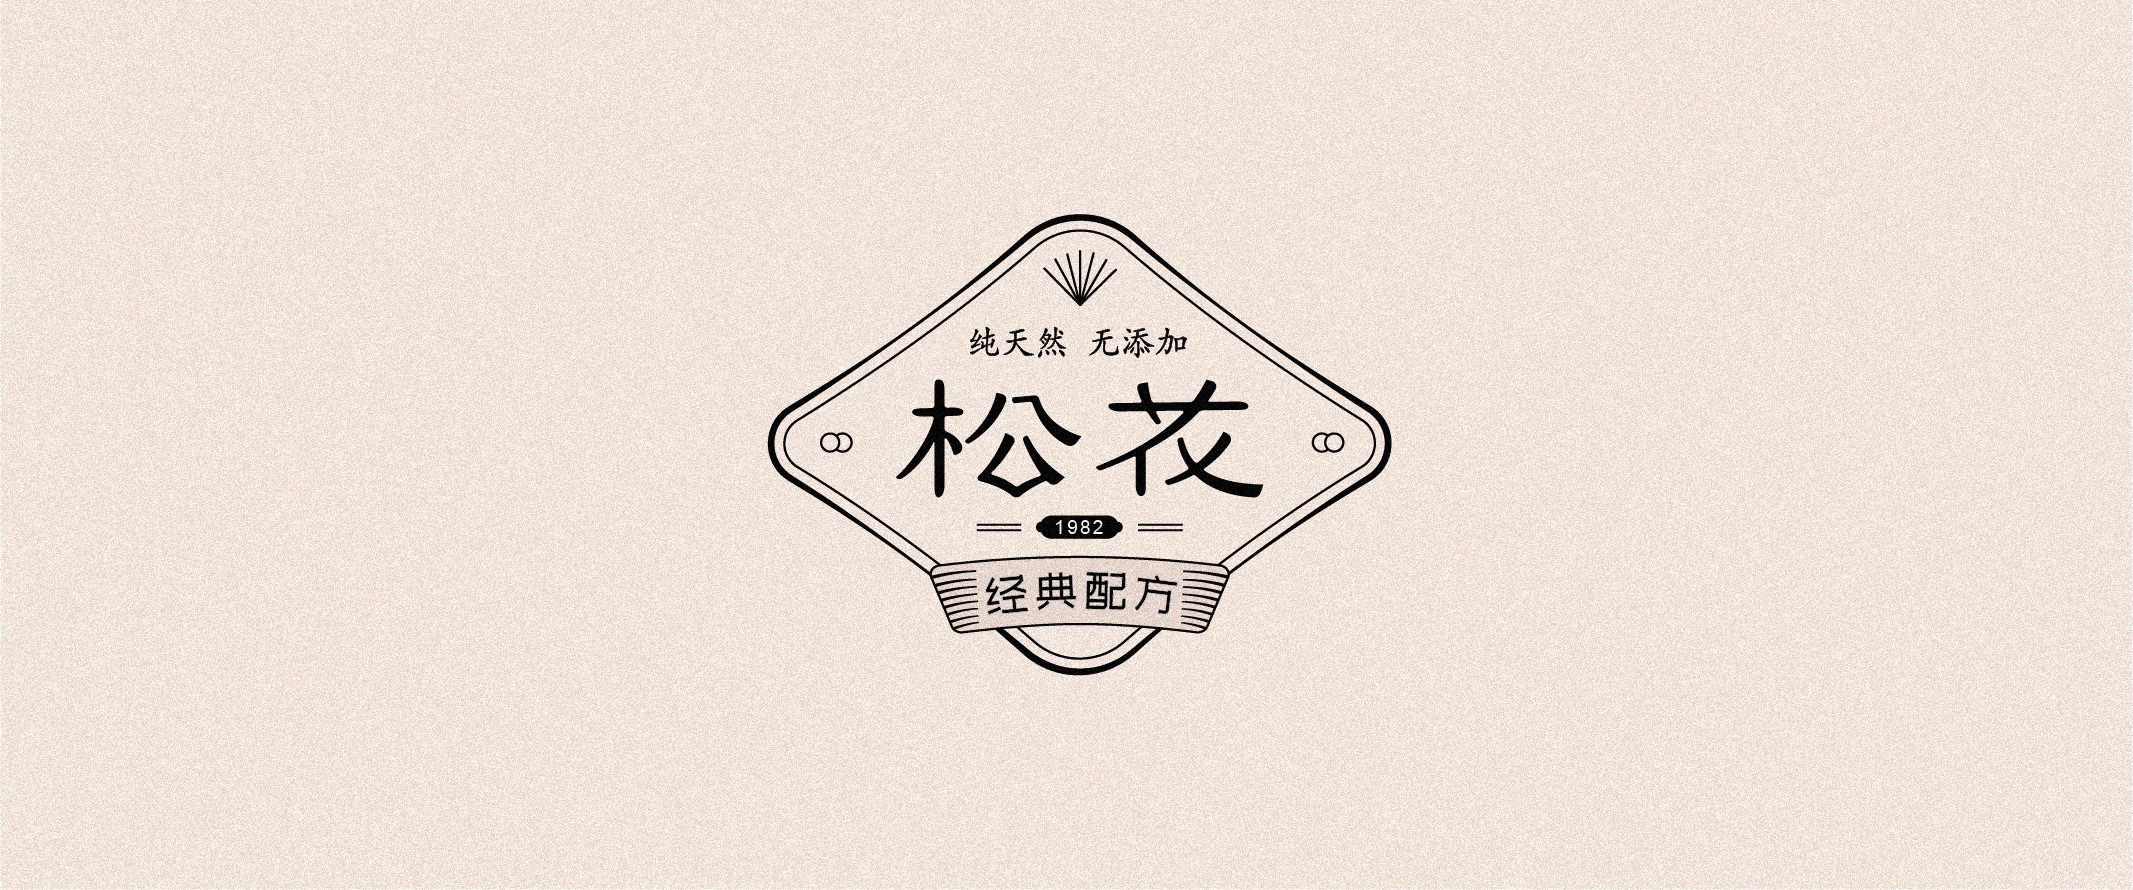 33P Chinese font design collection inspiration #.139